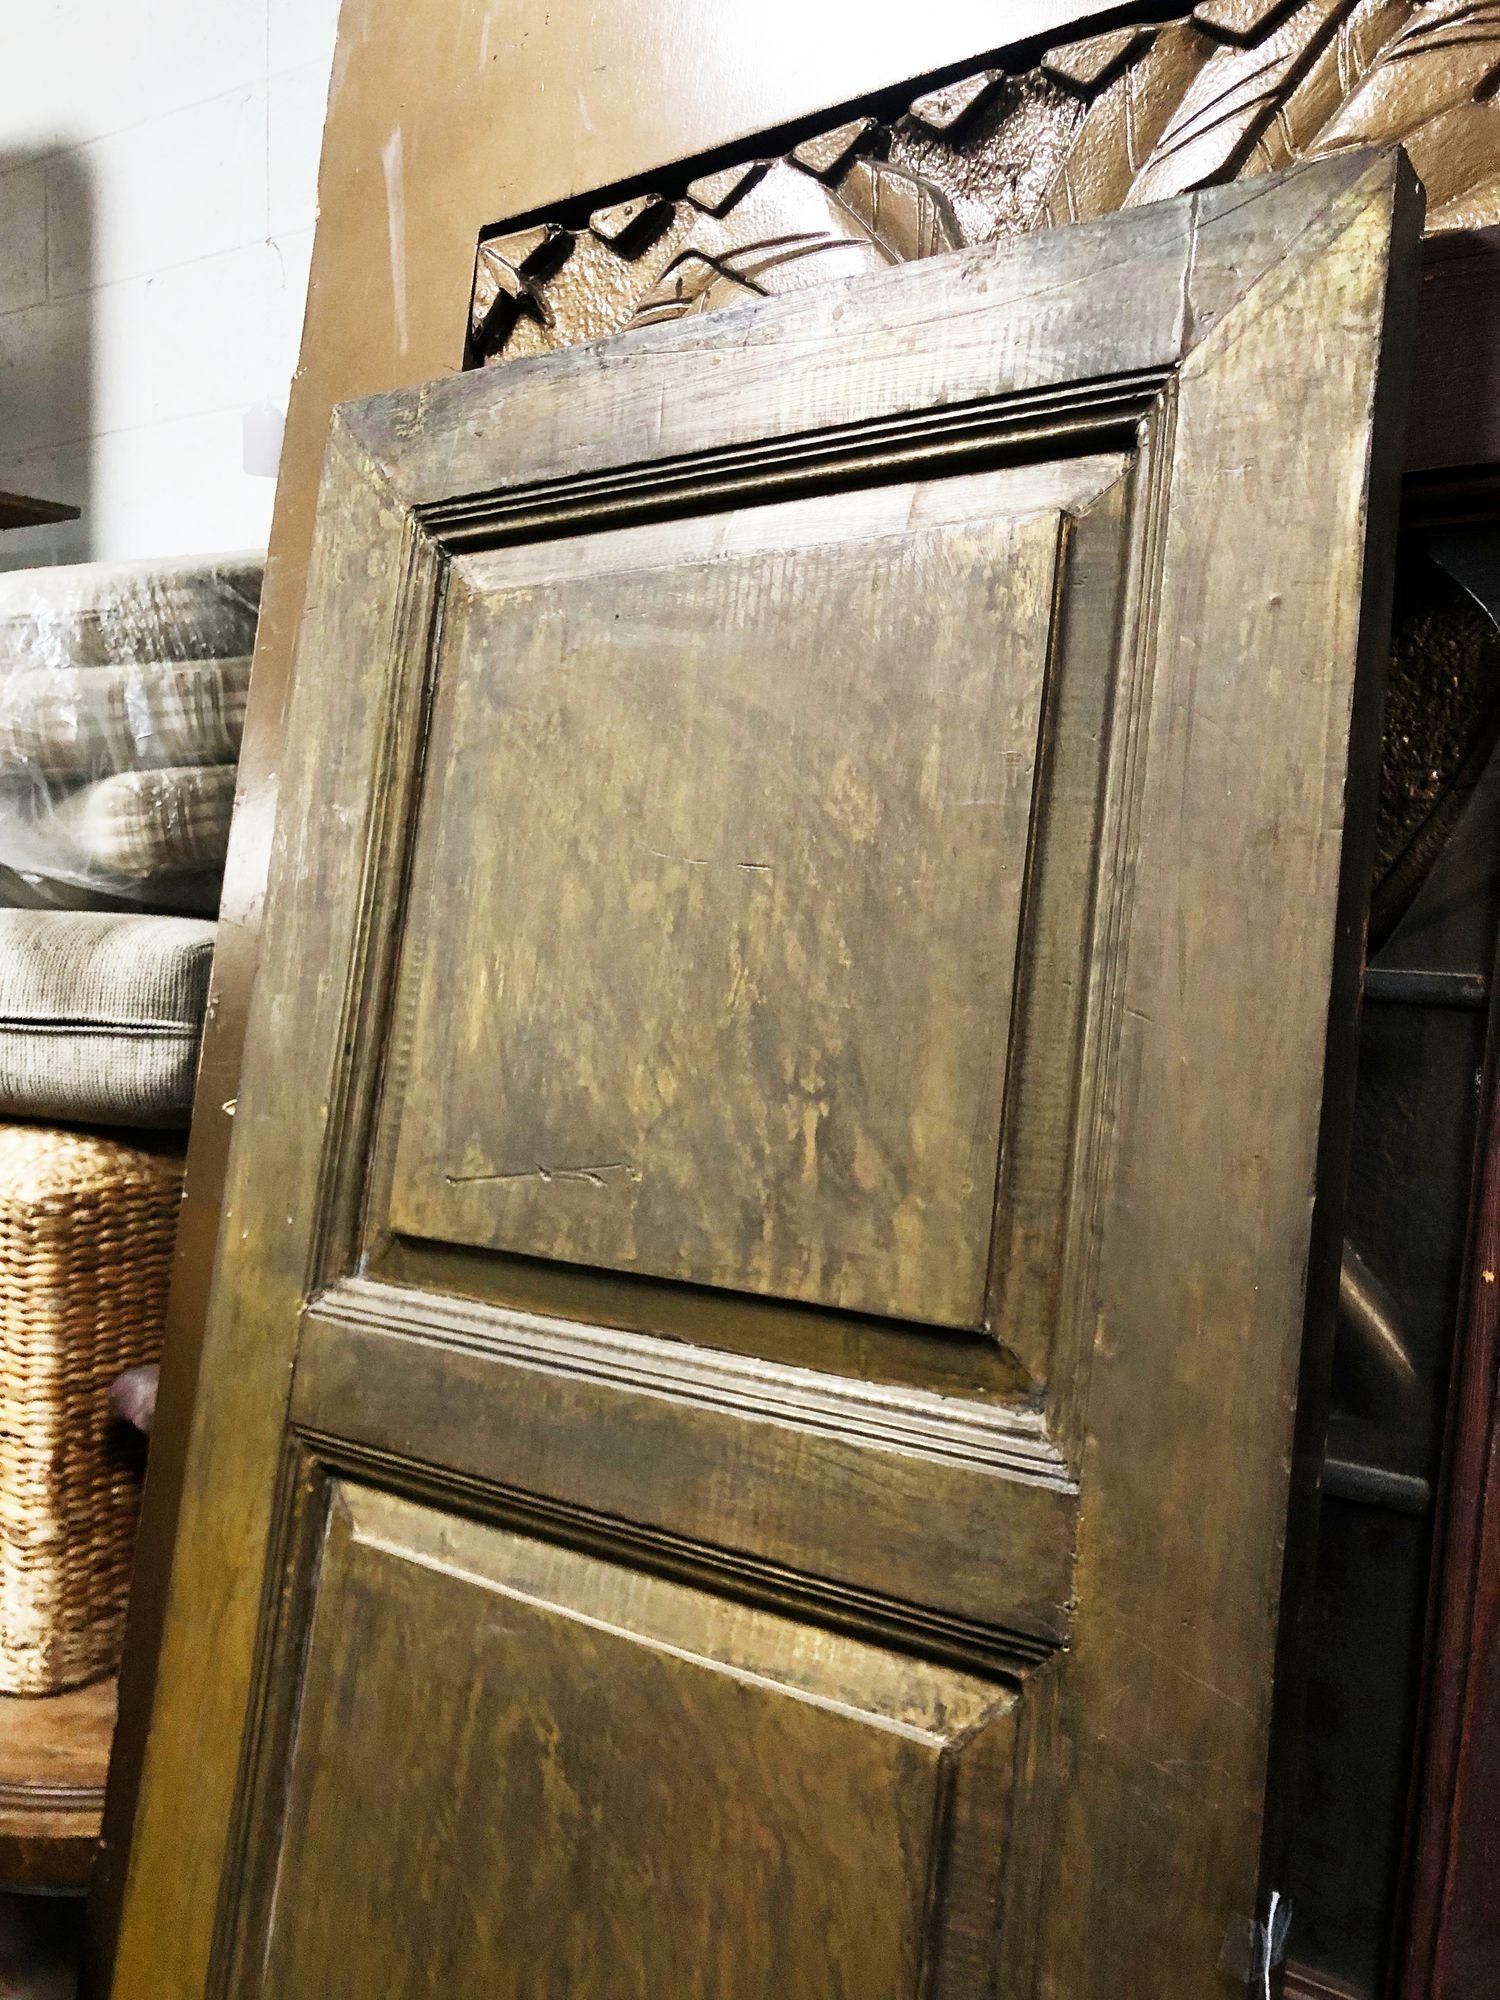 This is a single large copper-painted solid oak door for your unique Hollywood regency decor needs.

Dimensions:

Height: 79.5